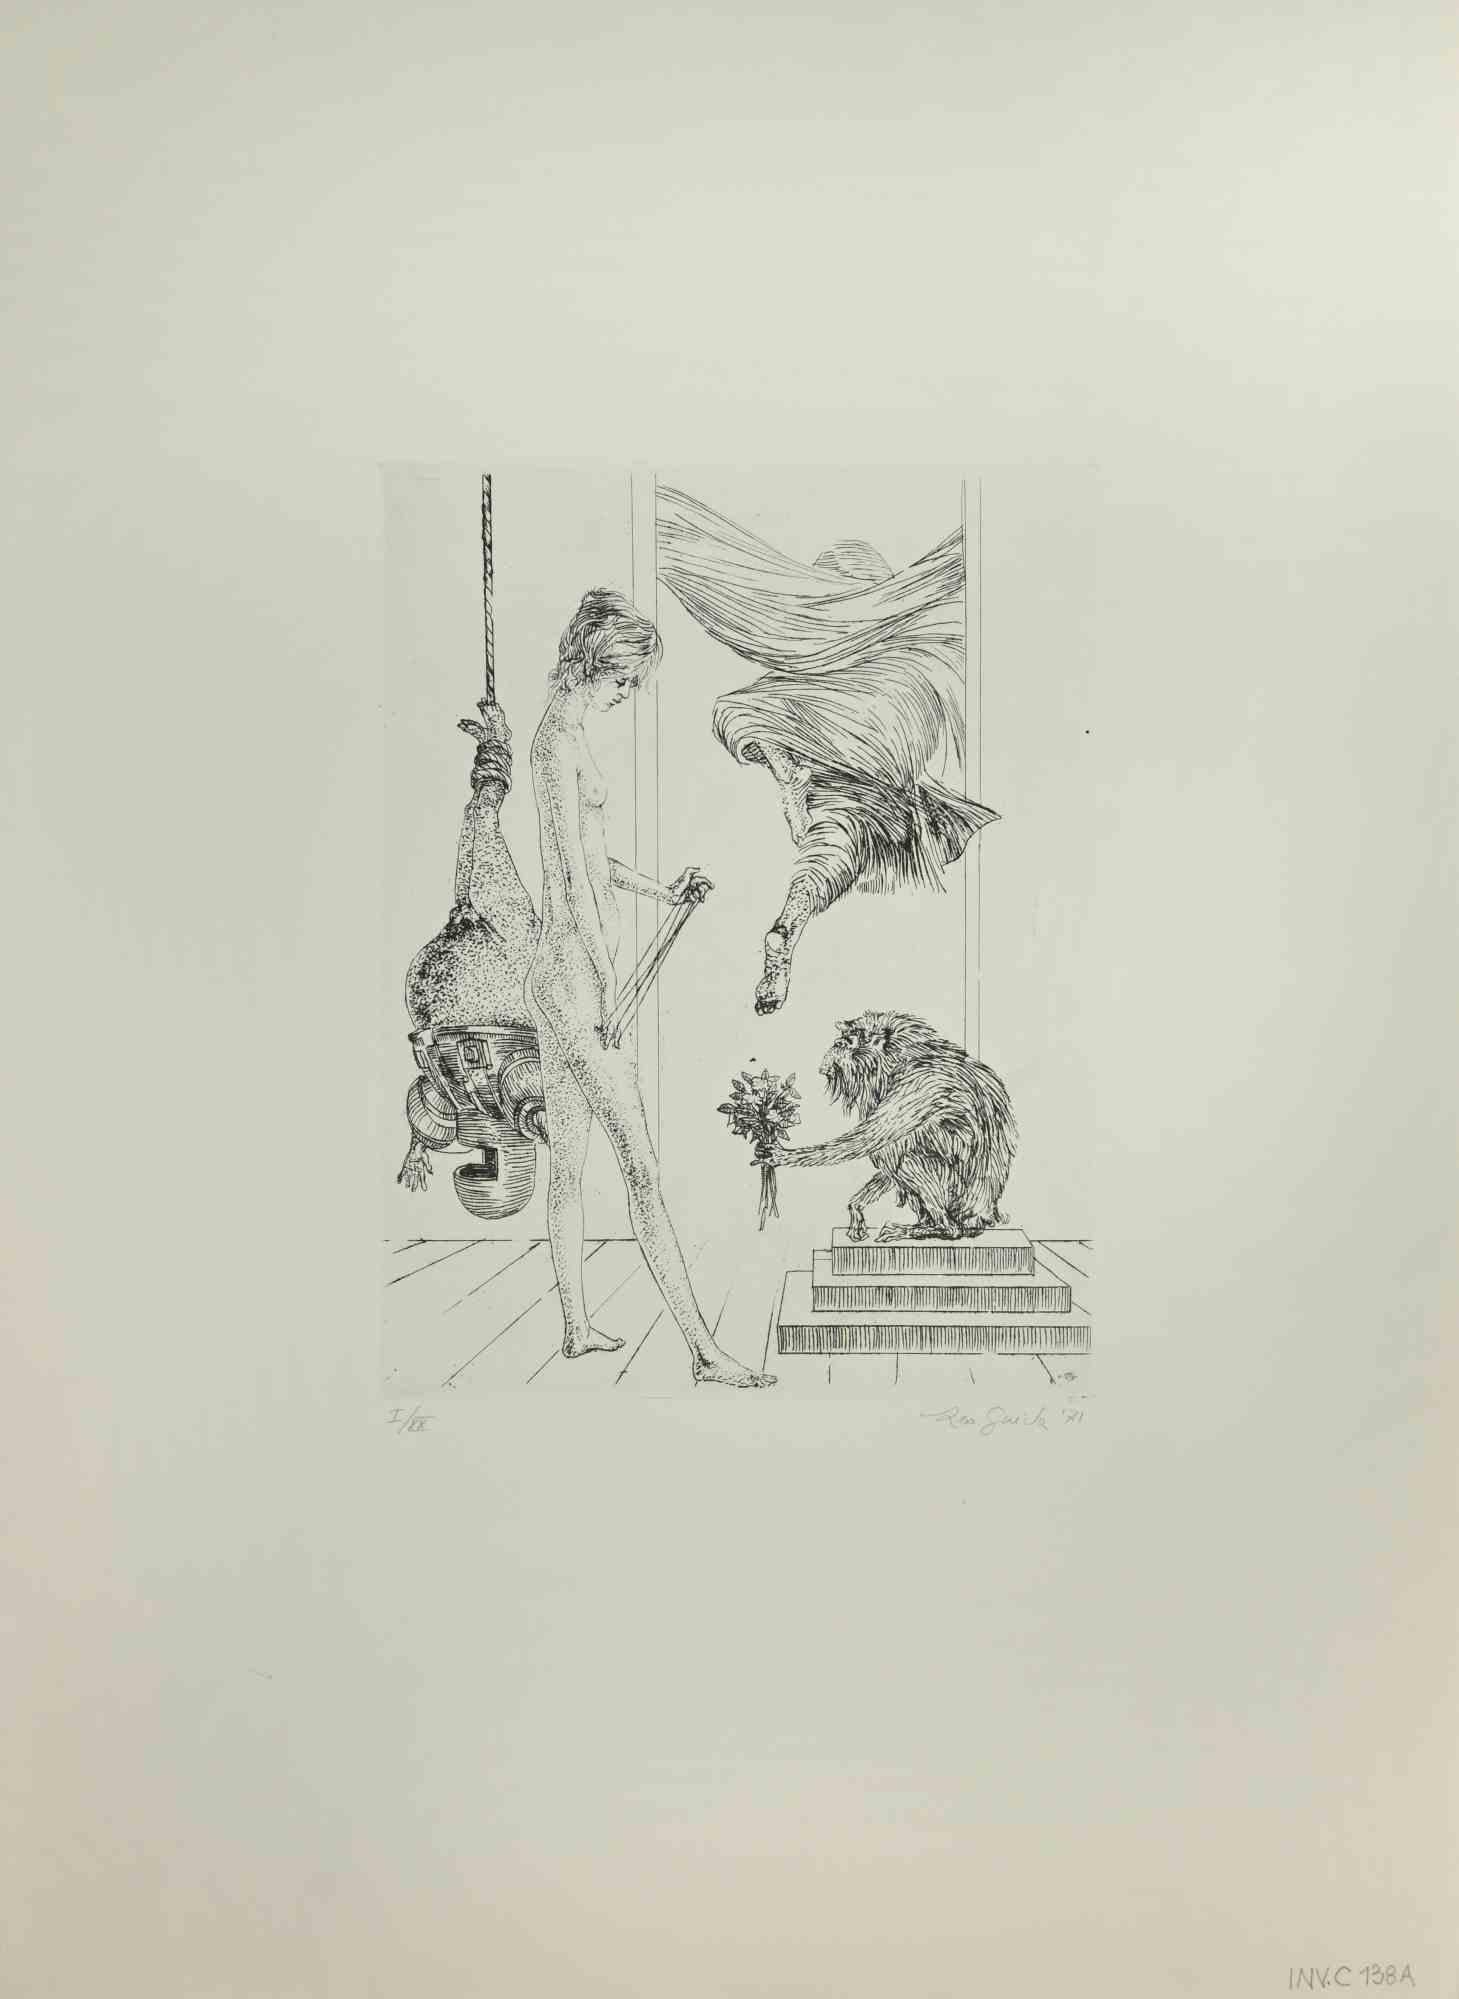 Woman with monkey is an artwork realized by Leo Guida, in 1971. 

Etching, 50 x 70 cm.

Edition I/XX

Handsigned and dated lower right margin.

Very good conditions